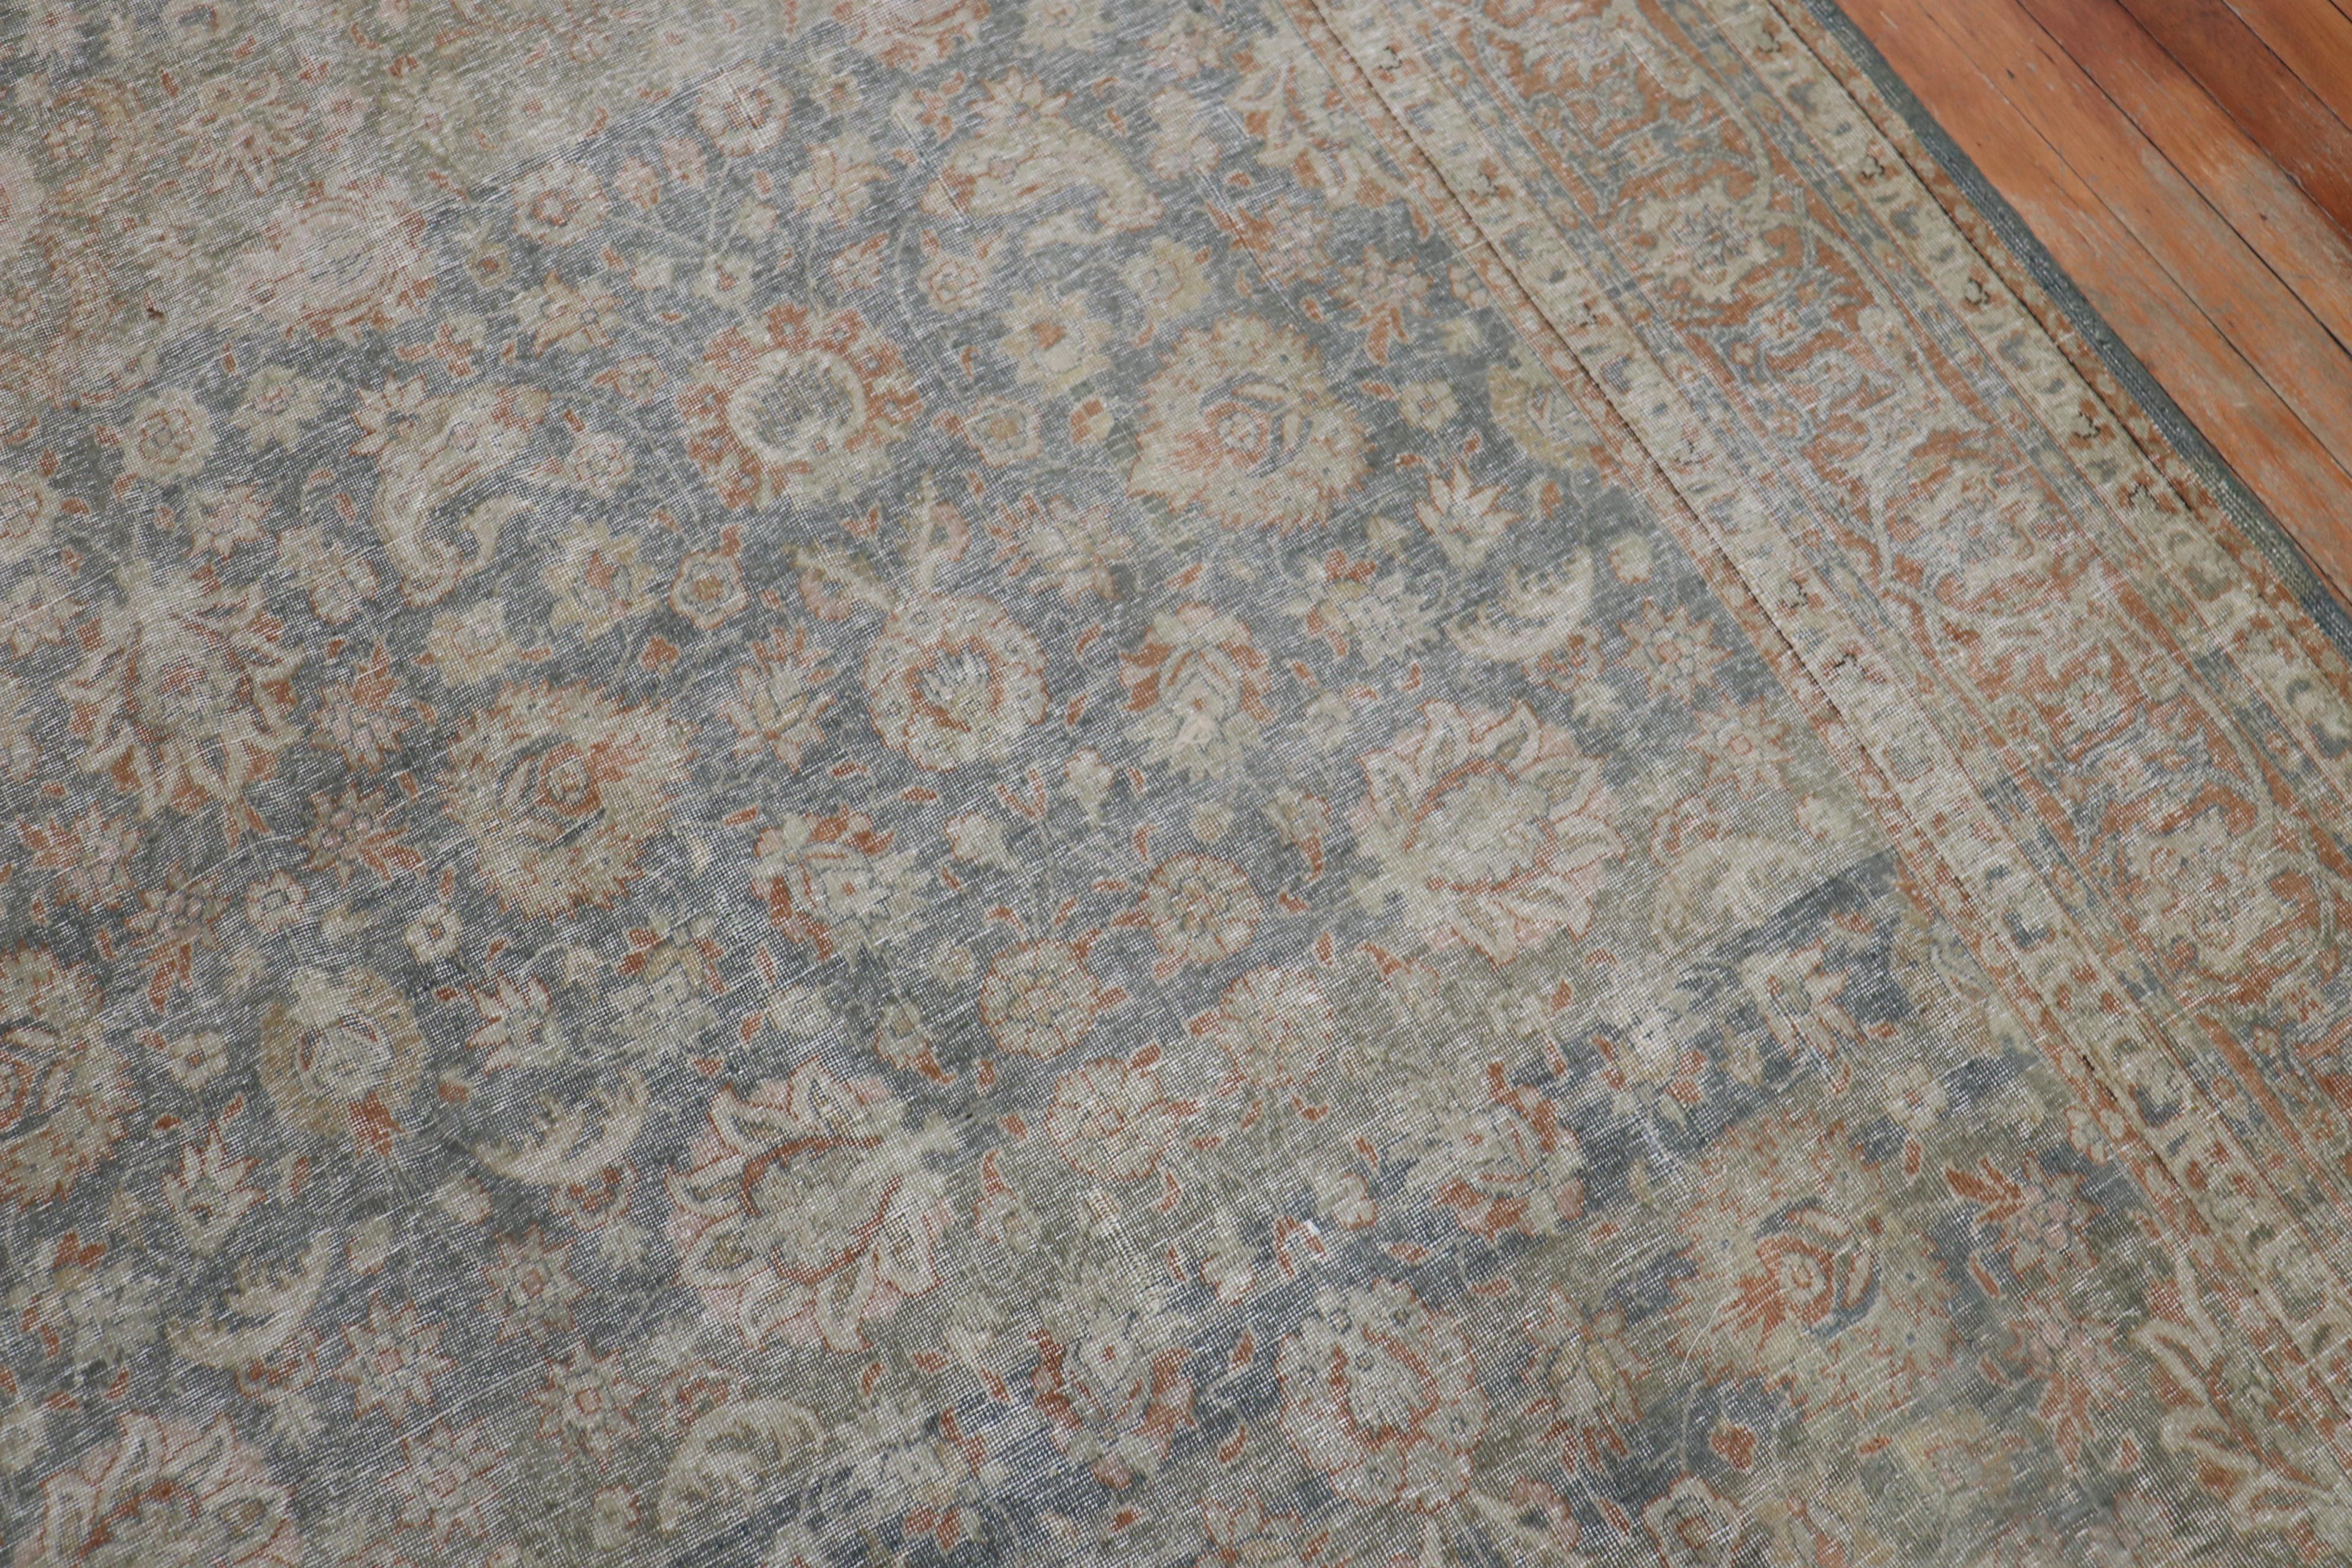 Hand-Woven Green Apricot Distressed Persian Tabriz Rug